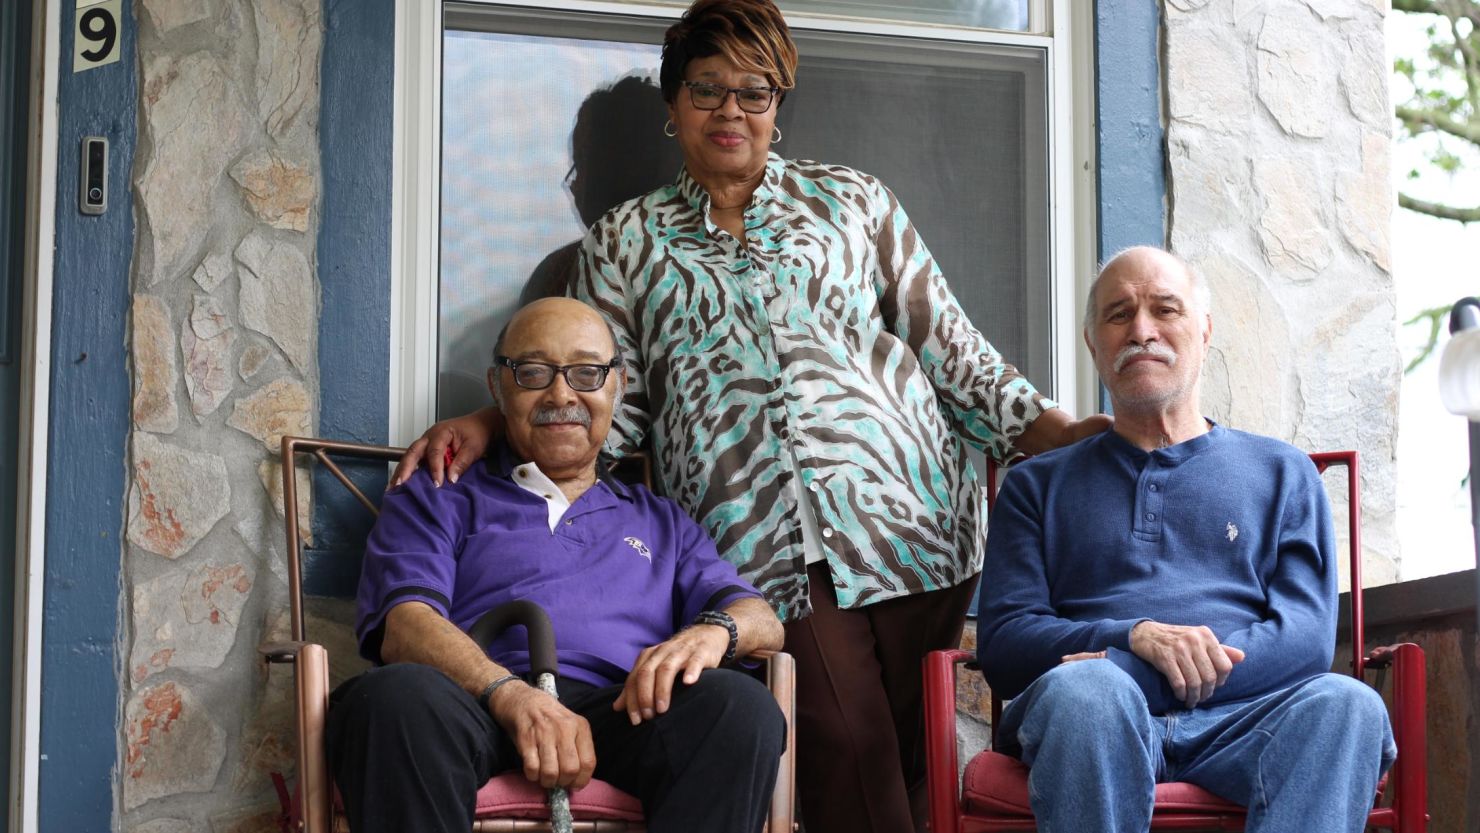 Joann West says that taking care of veterans Ralph Stepney, left, and Frank Hundt at her home in Baltimore is a "joy."